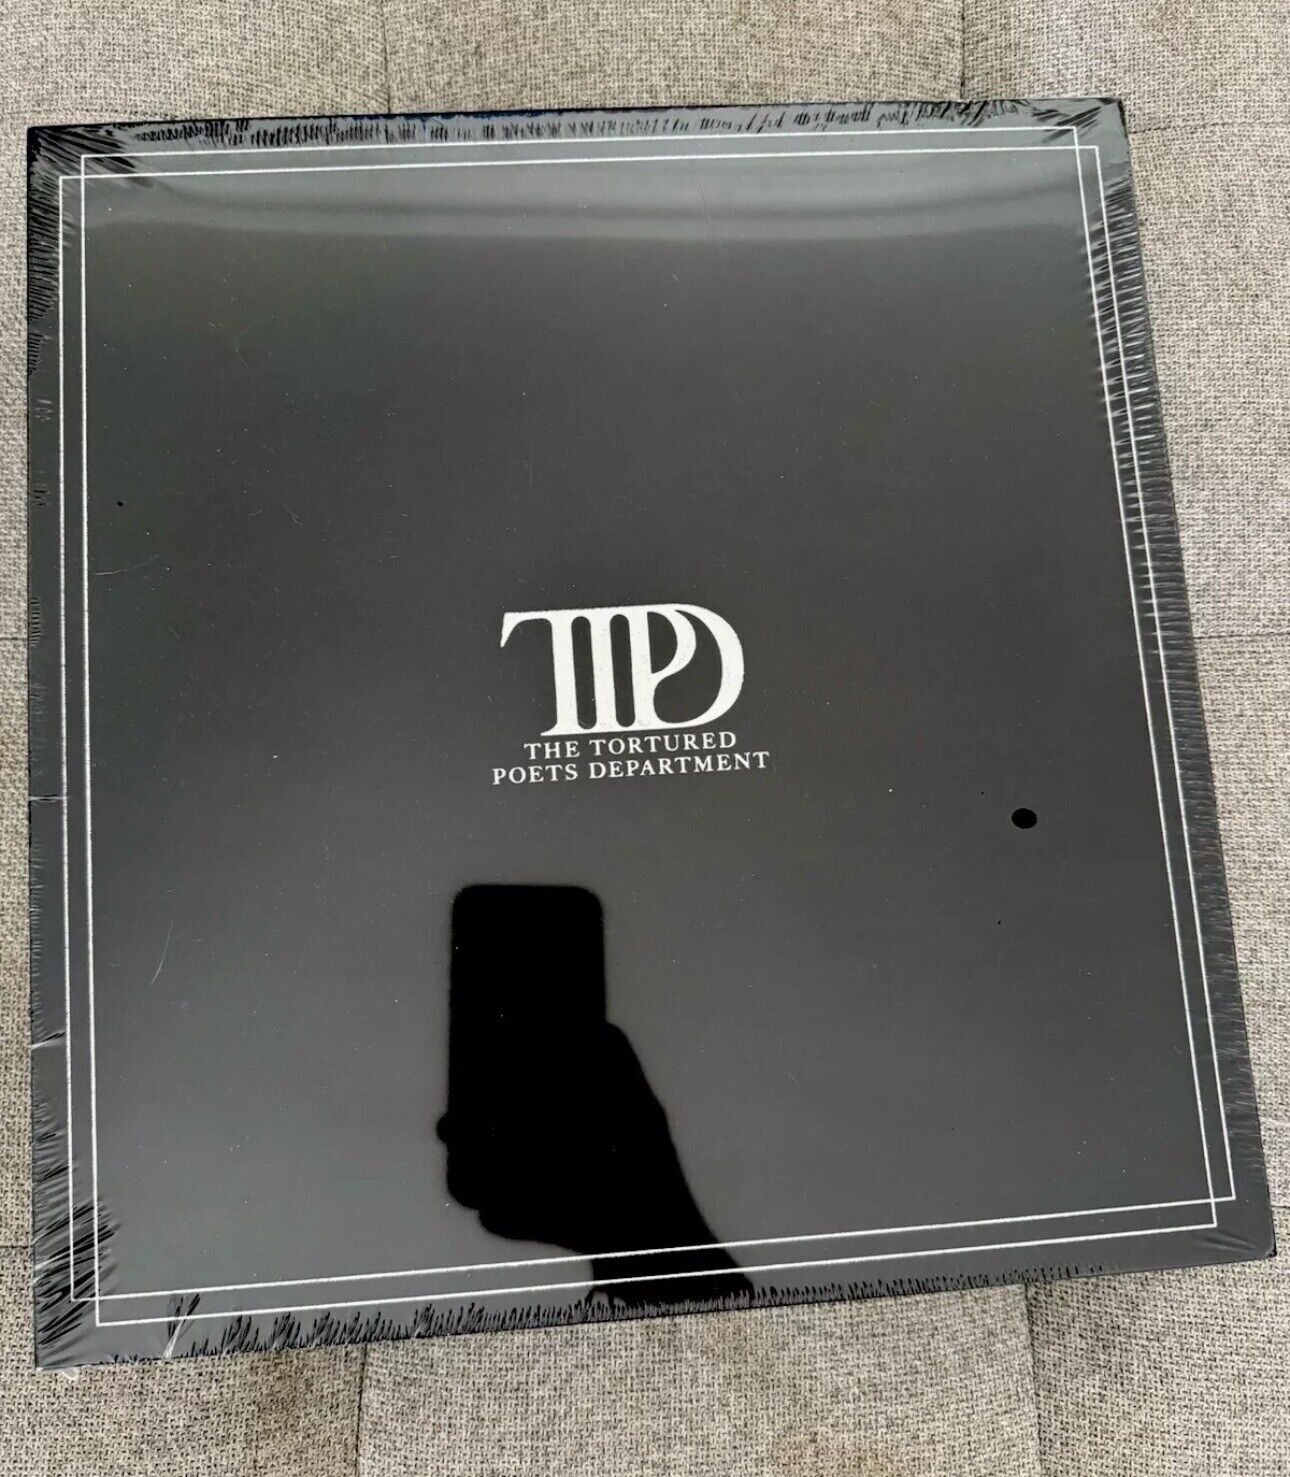 Taylor Swift - The Tortured Poets Department Vinyl Display Case ready to ship